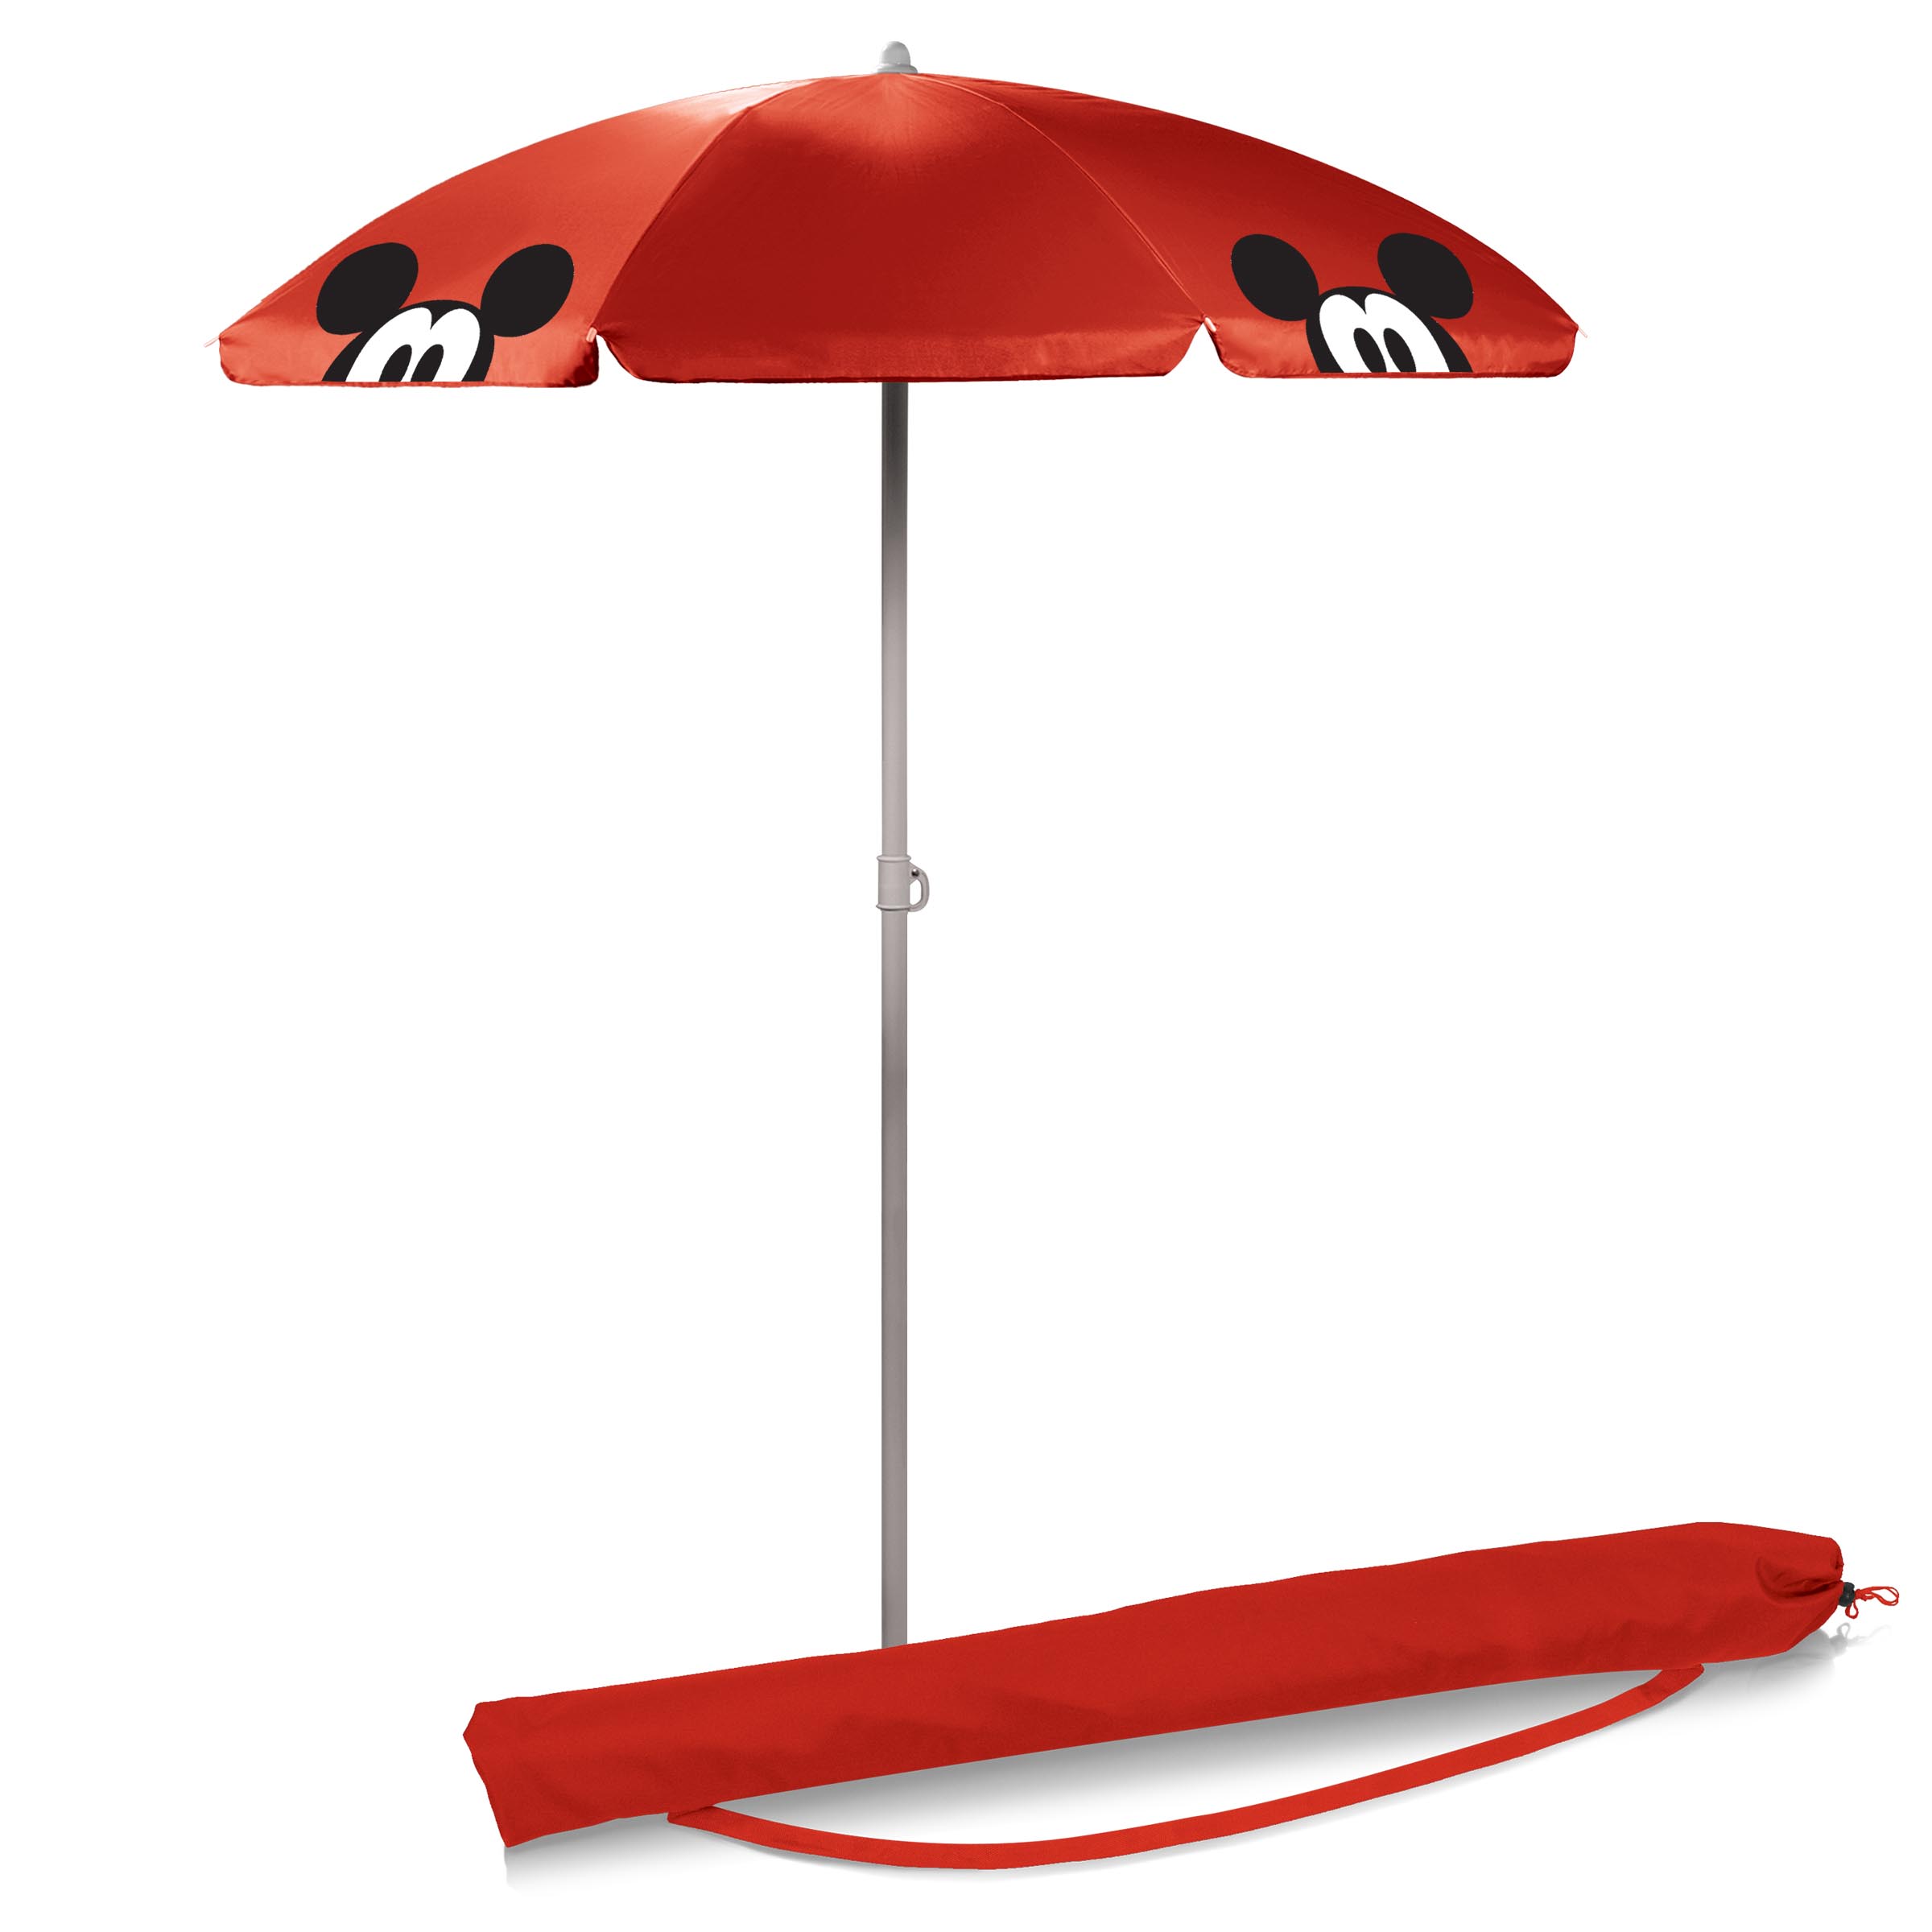 Mickey Mouse - '5.5' Portable Beach Umbrella by Picnic Time (Red ...